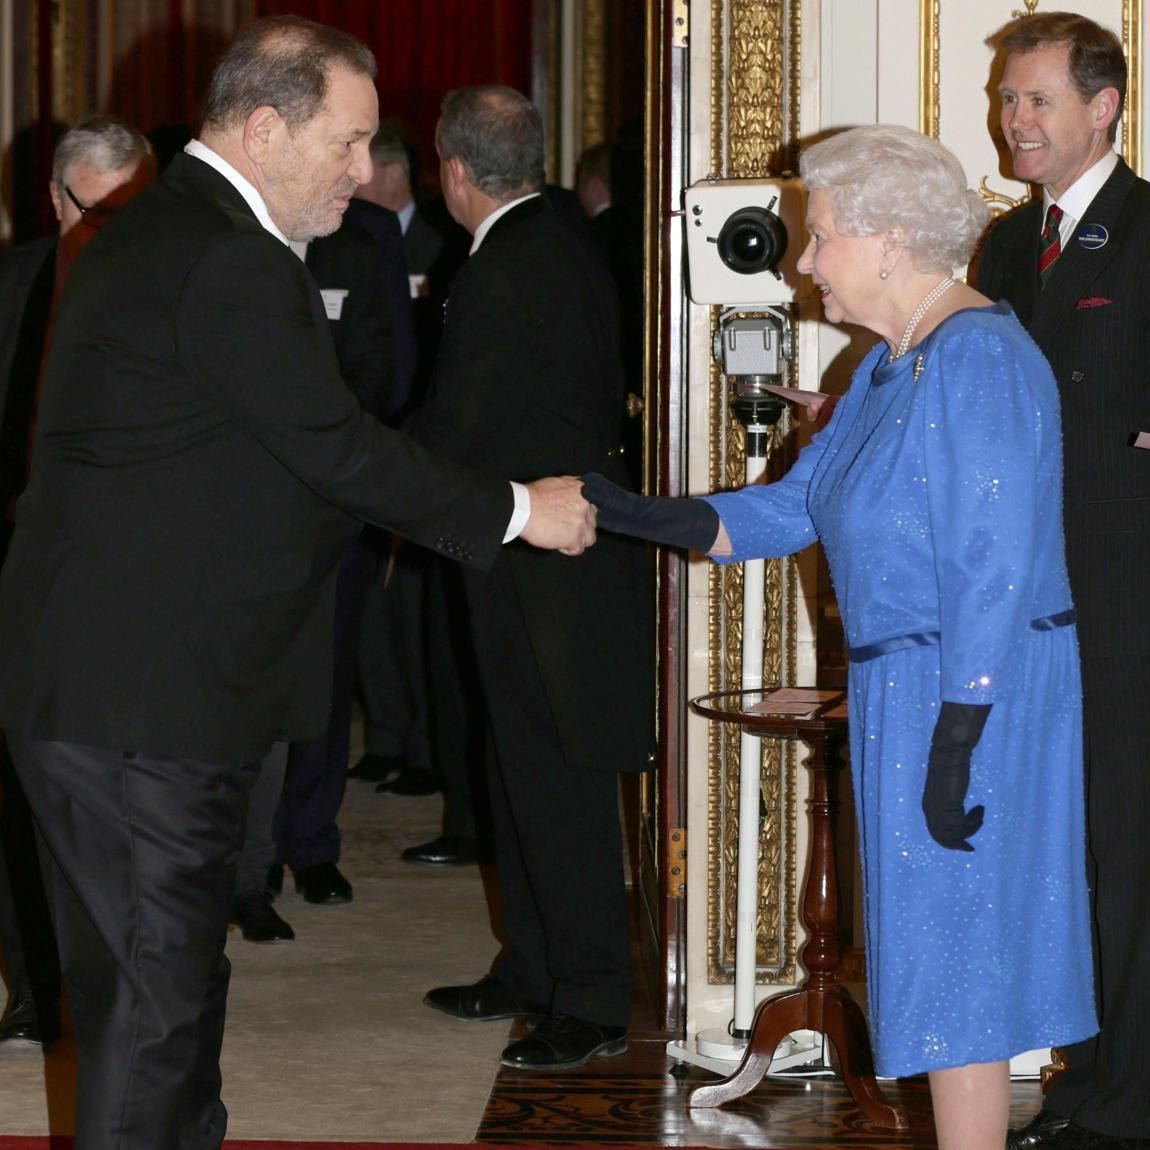 Her Majesty has stripped Harvey Weinstein of his CBE honor